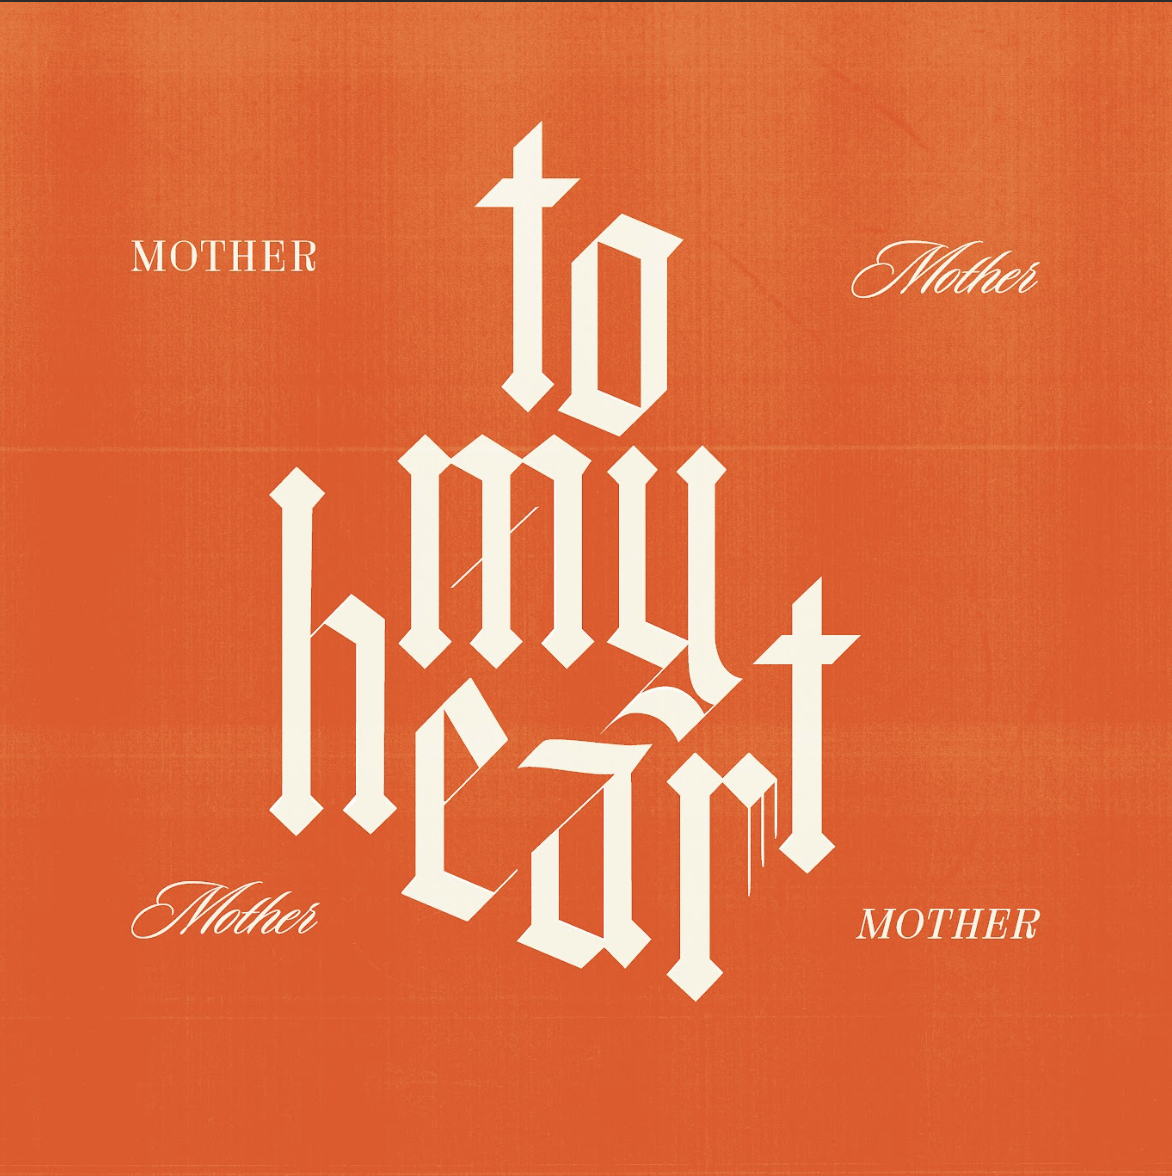 Mother Mother announces new album and live tour dates – Iowa State Daily